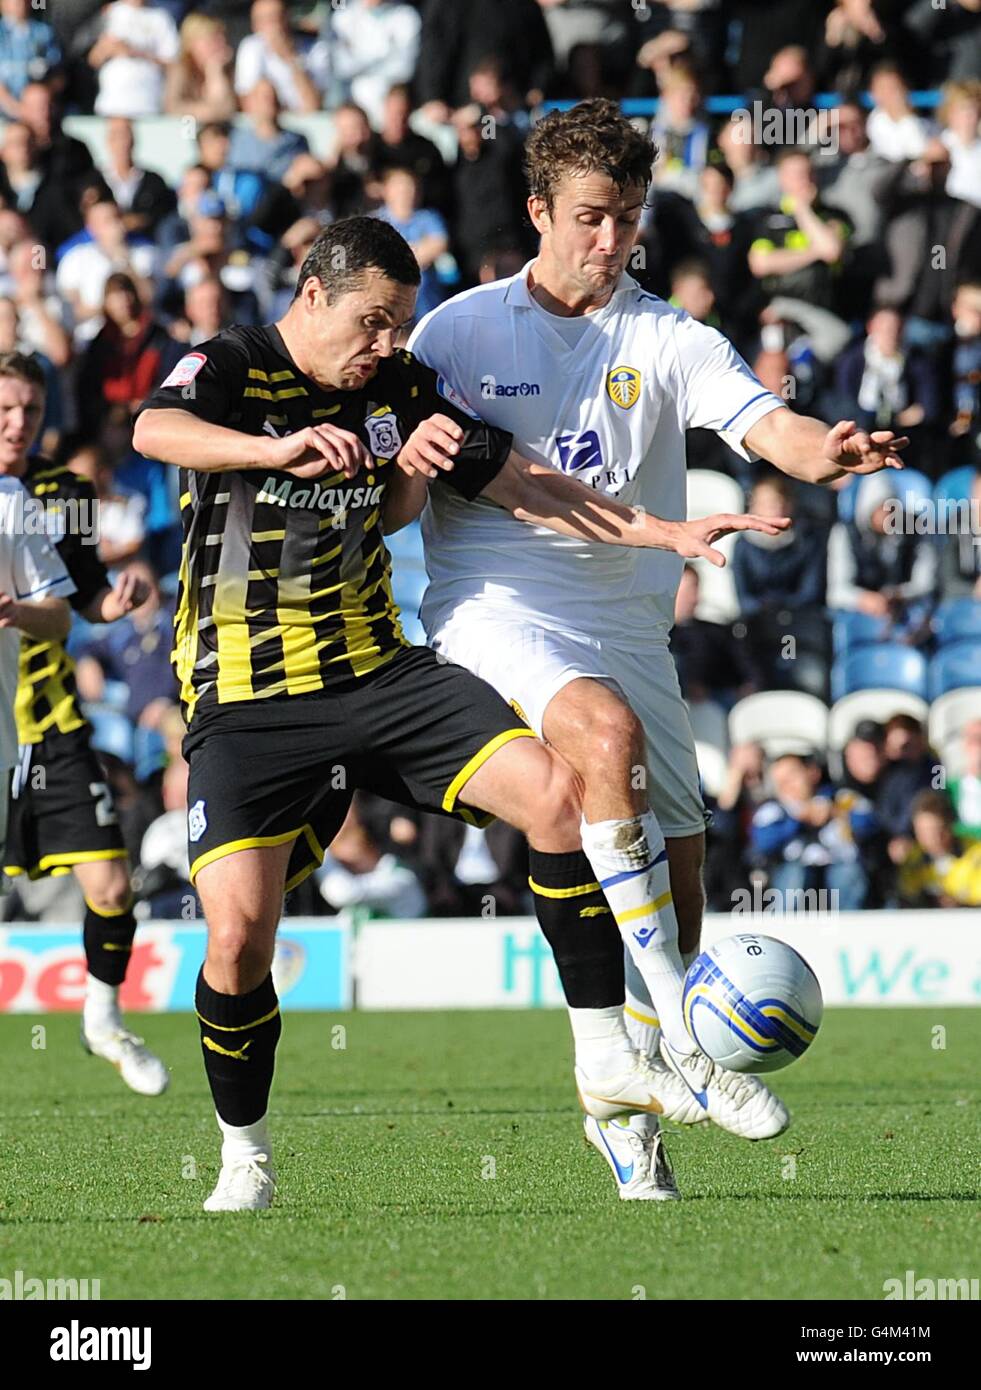 Soccer - npower Football League Championship - Leeds United v Cardiff City - Elland Road. Cardiff City's Don Cowie (left) and Leeds United's Danny Pugh battle for the ball Stock Photo